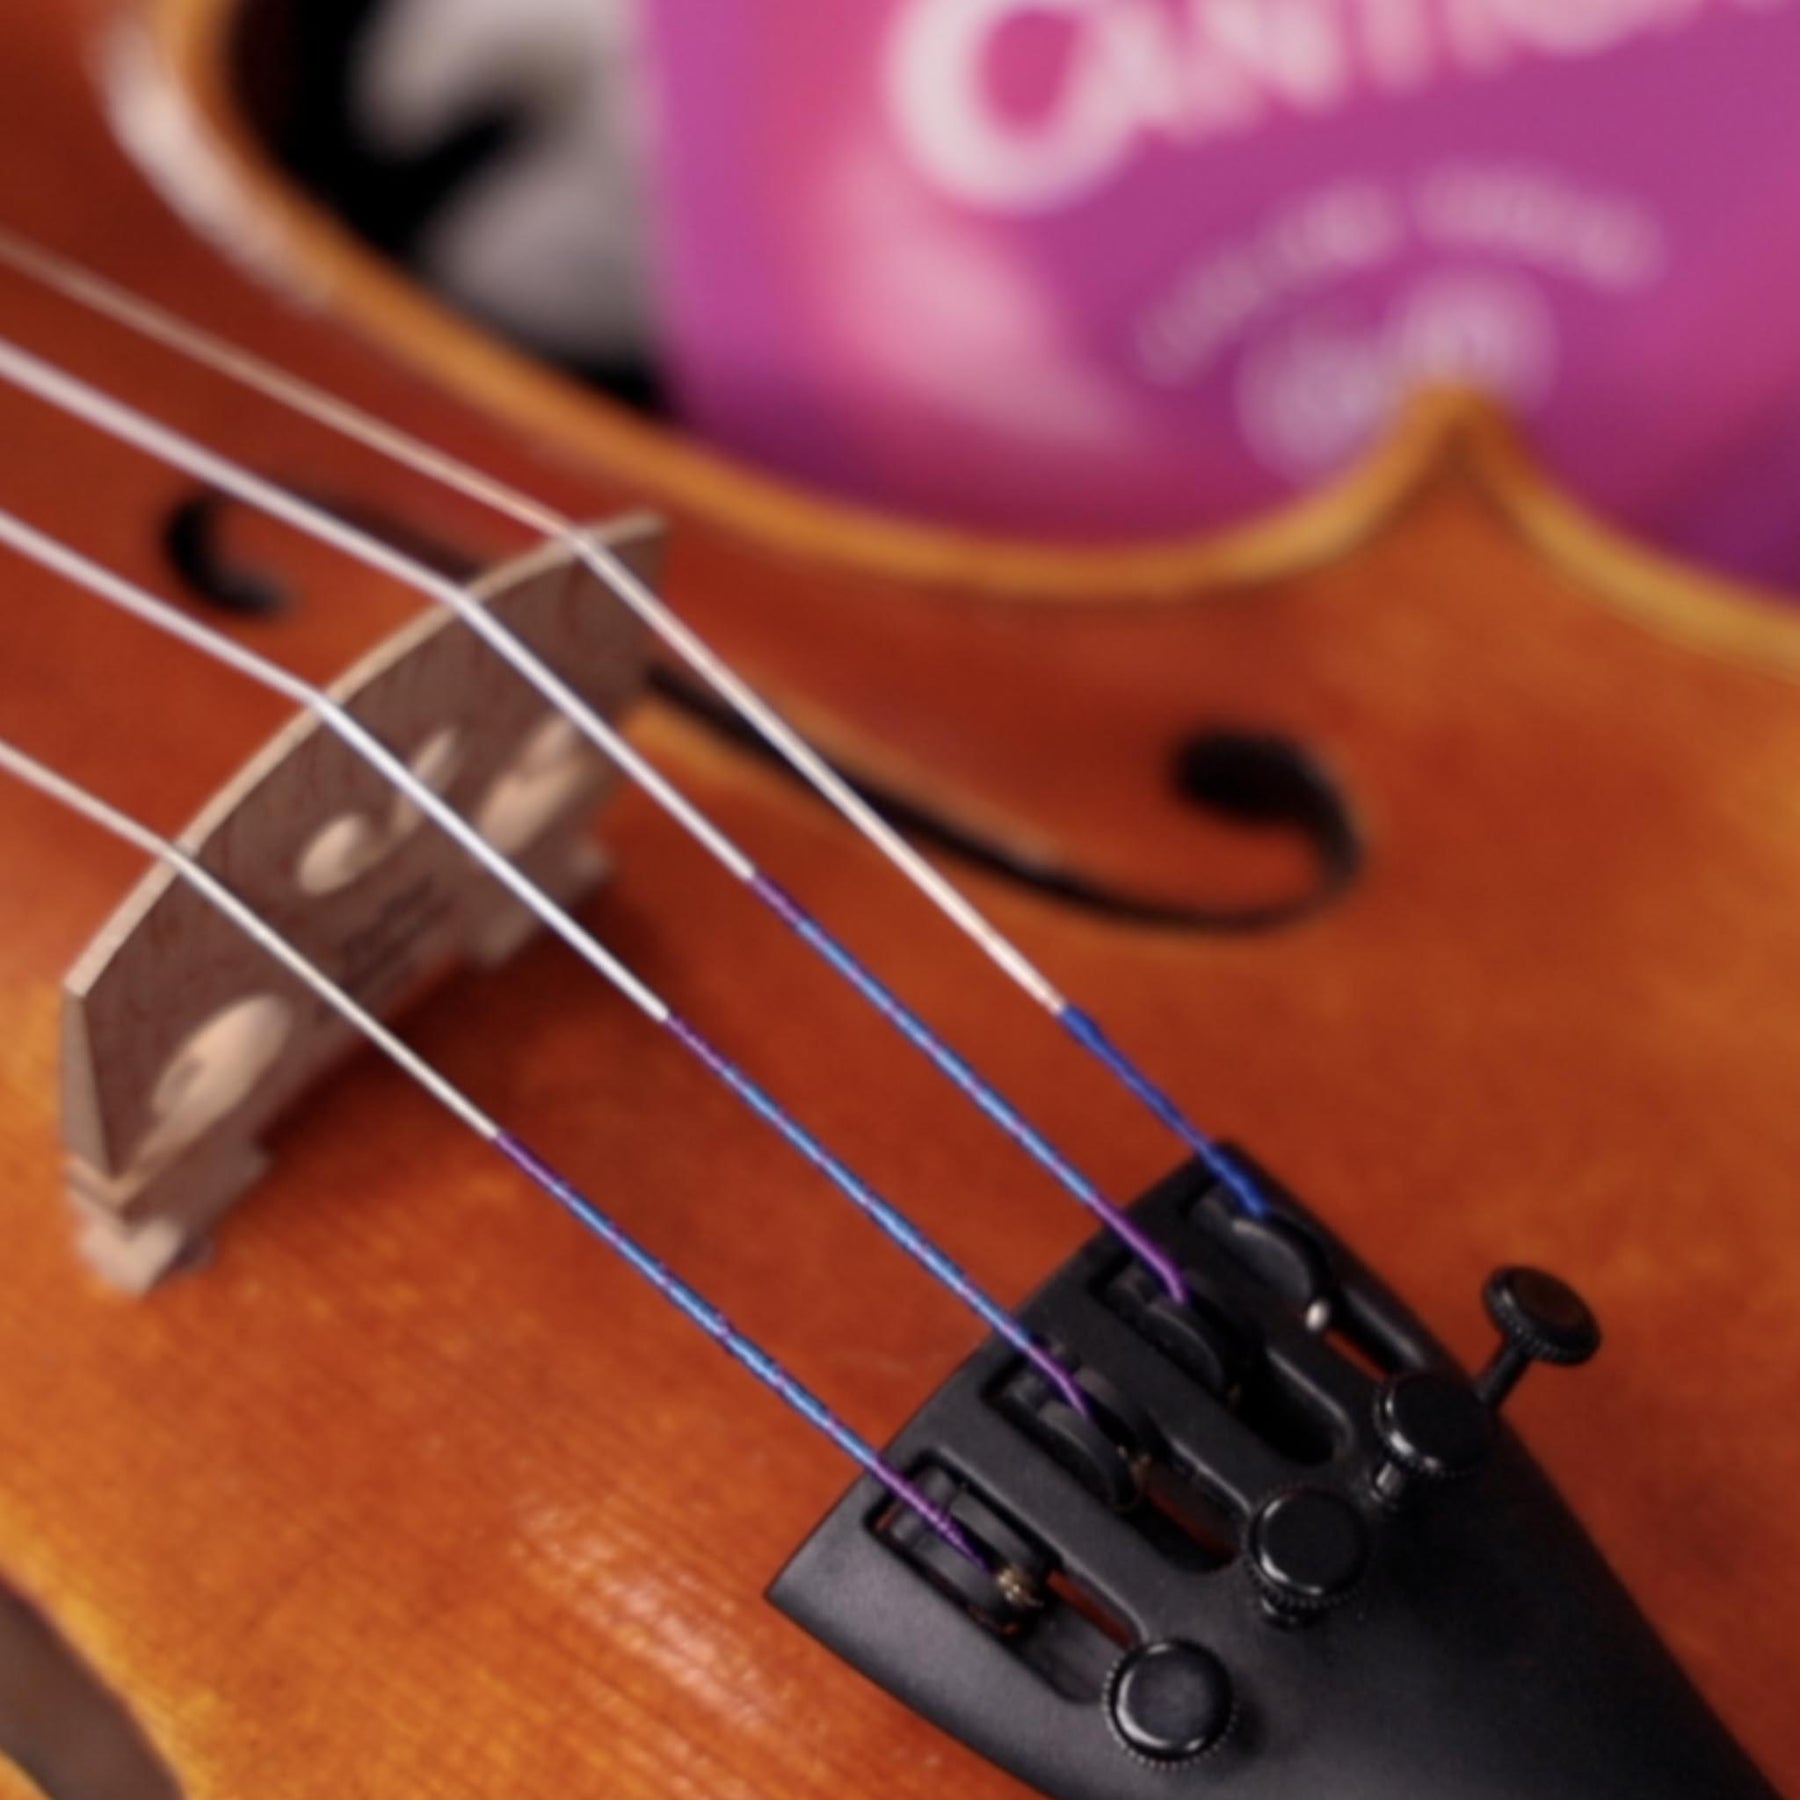 Guitar Strings, Accessories, Sheet Music, Violin Strings and MORE